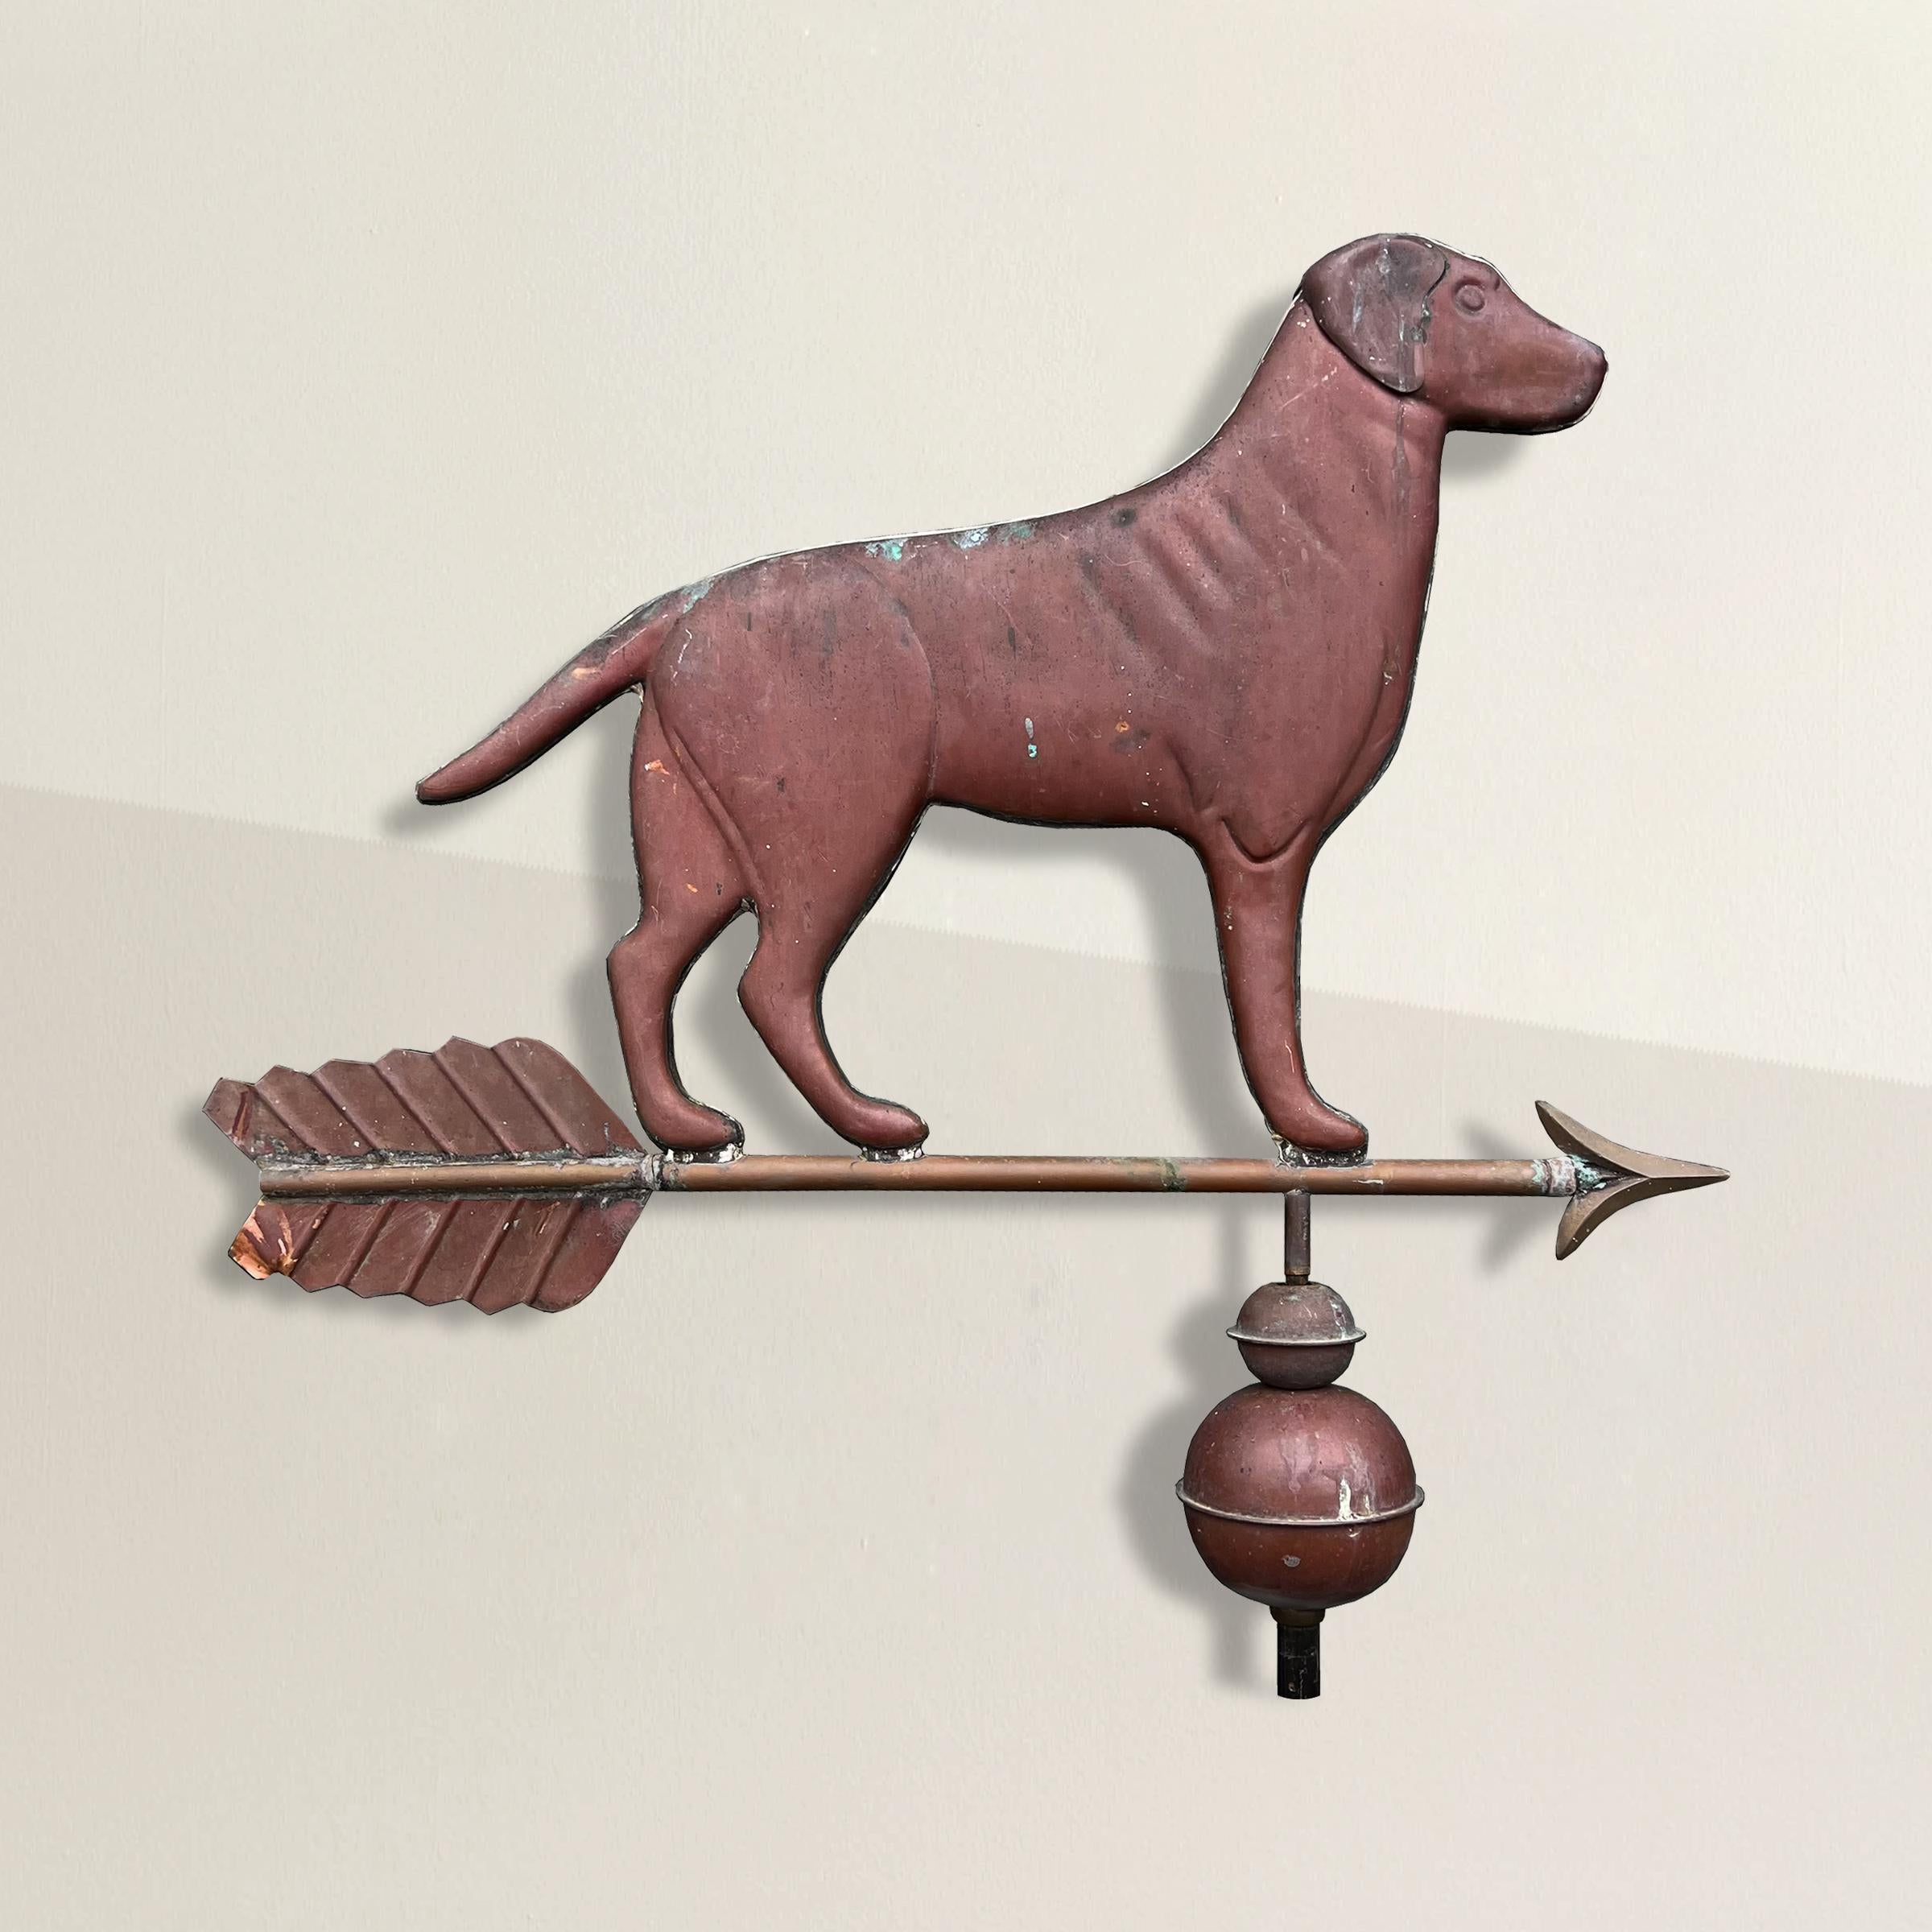 This 20th-century American copper Labrador weathervane is a captivating blend of artistry and functionality. Crafted with meticulous detail, it features a majestic Labrador standing proudly atop an arrow and two hollow spheres. The copper patina